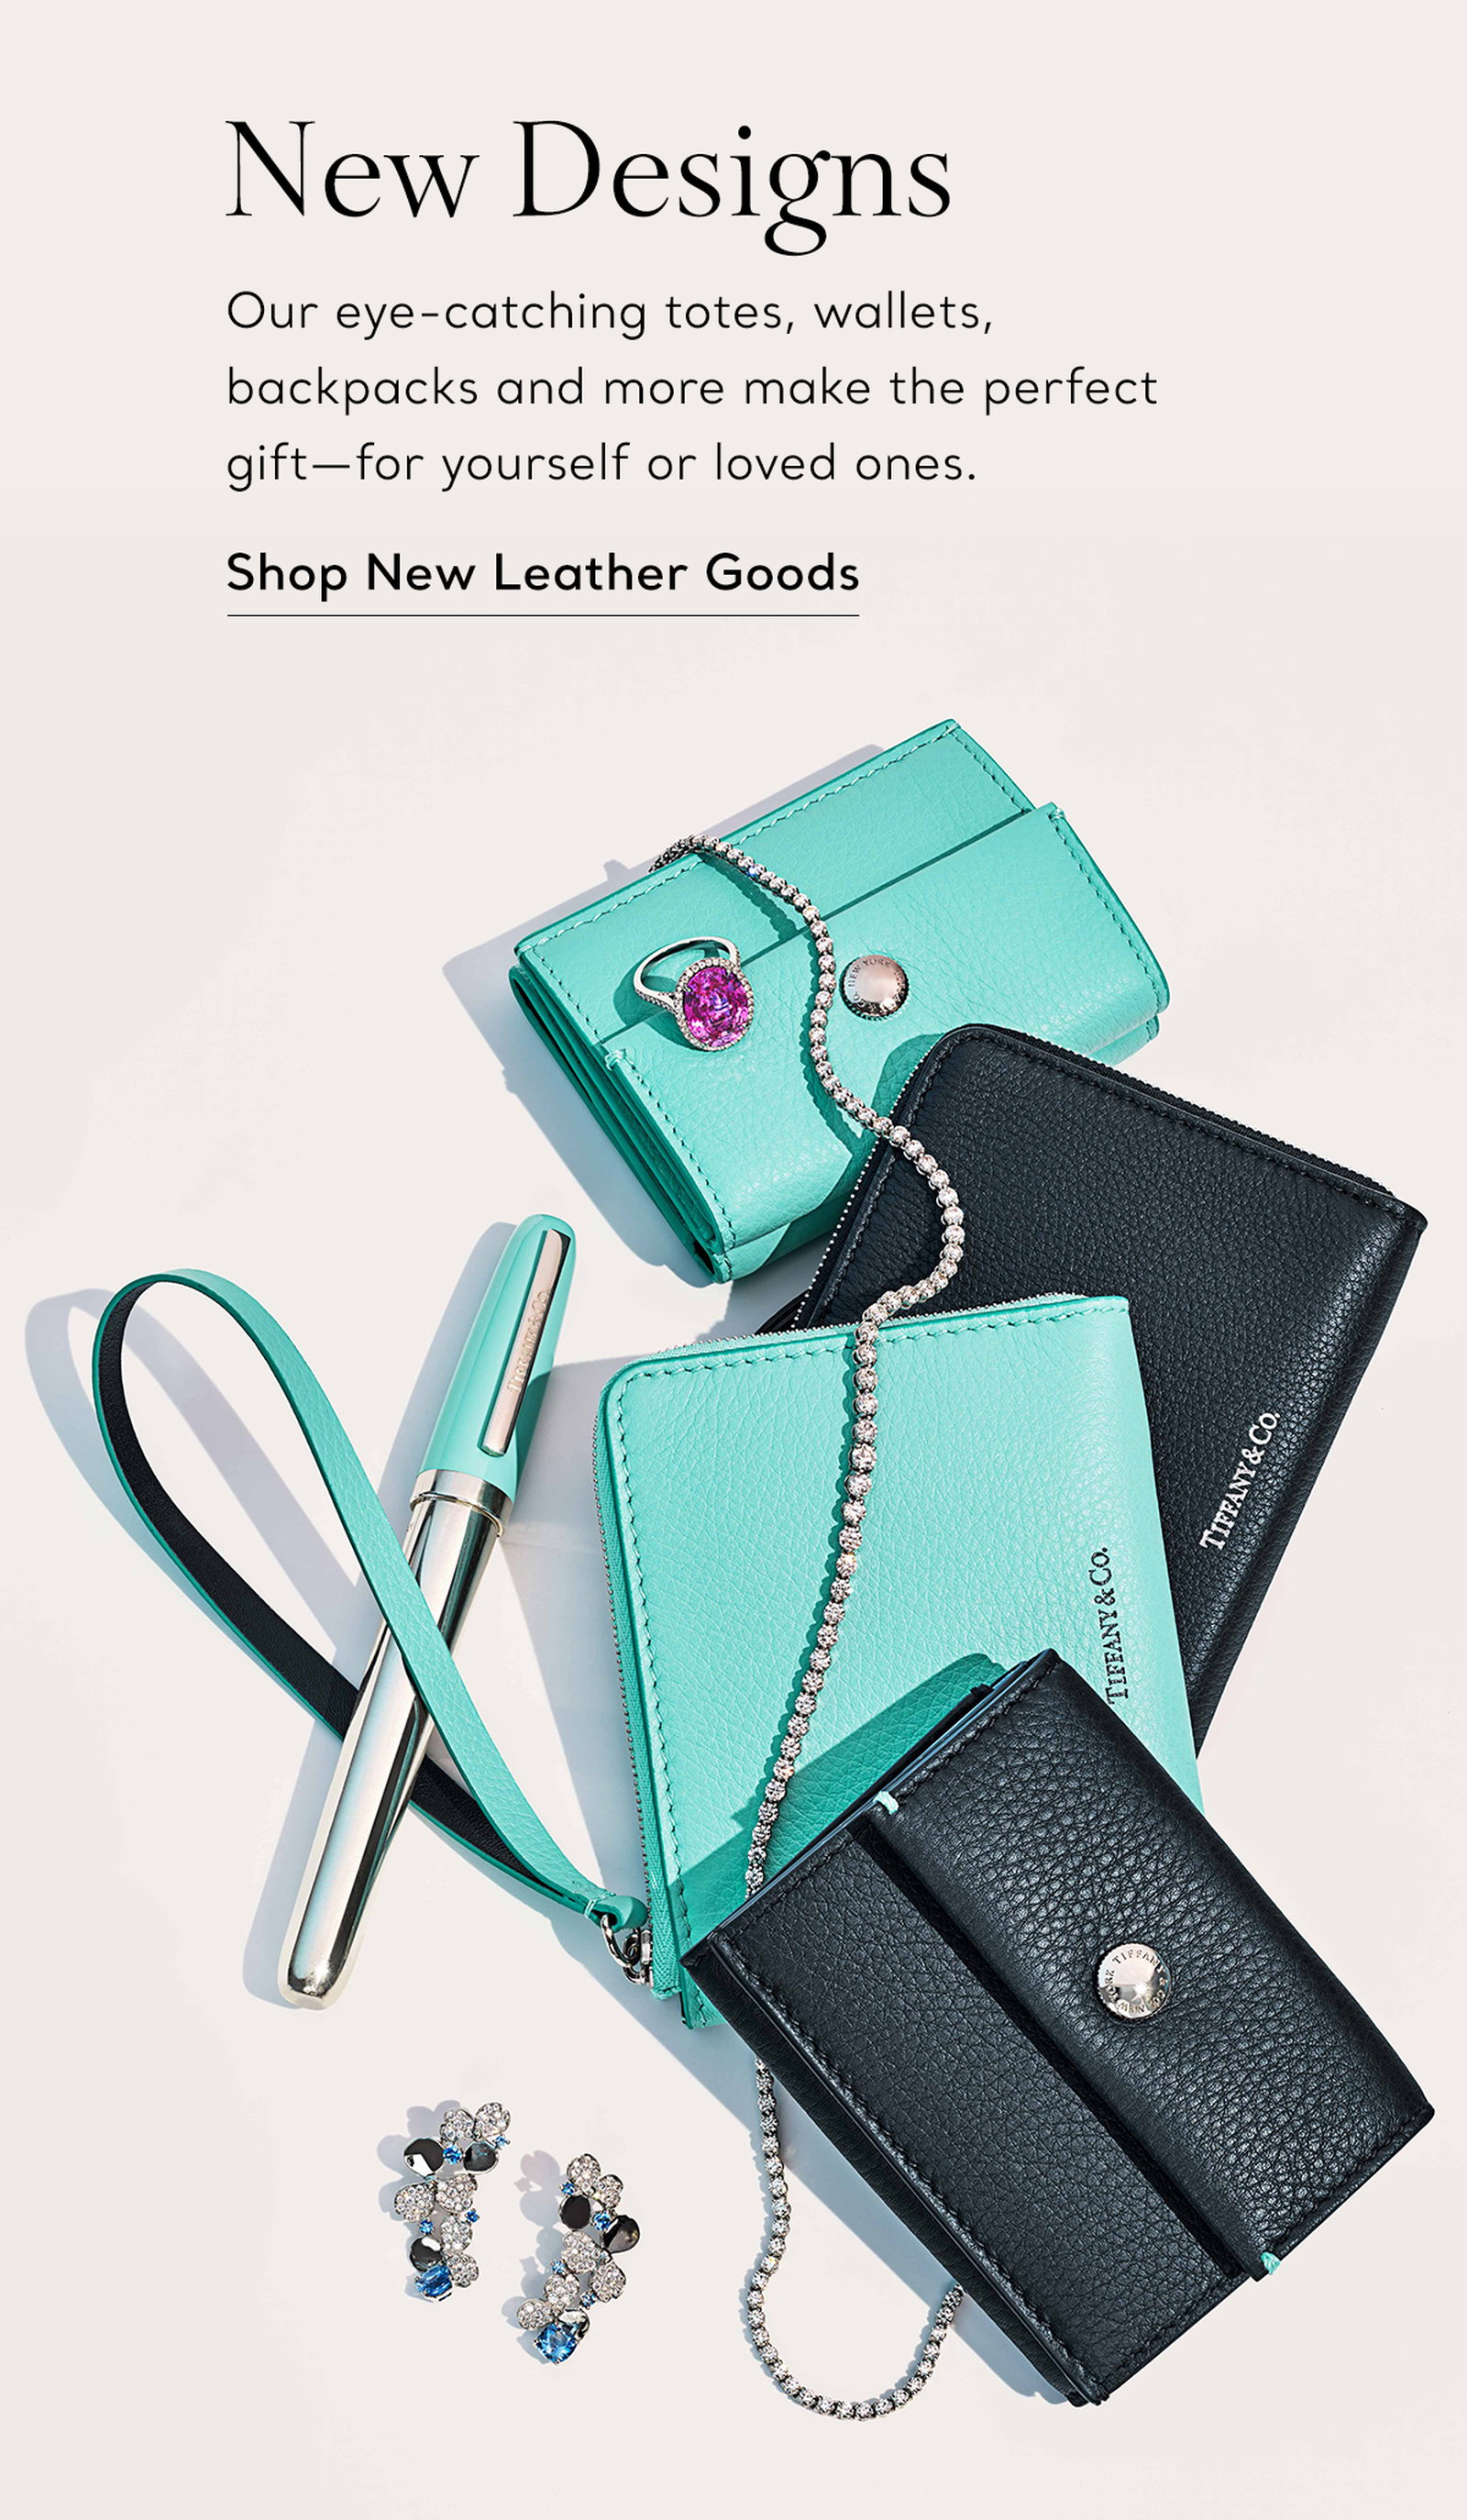 tiffany and co leather goods